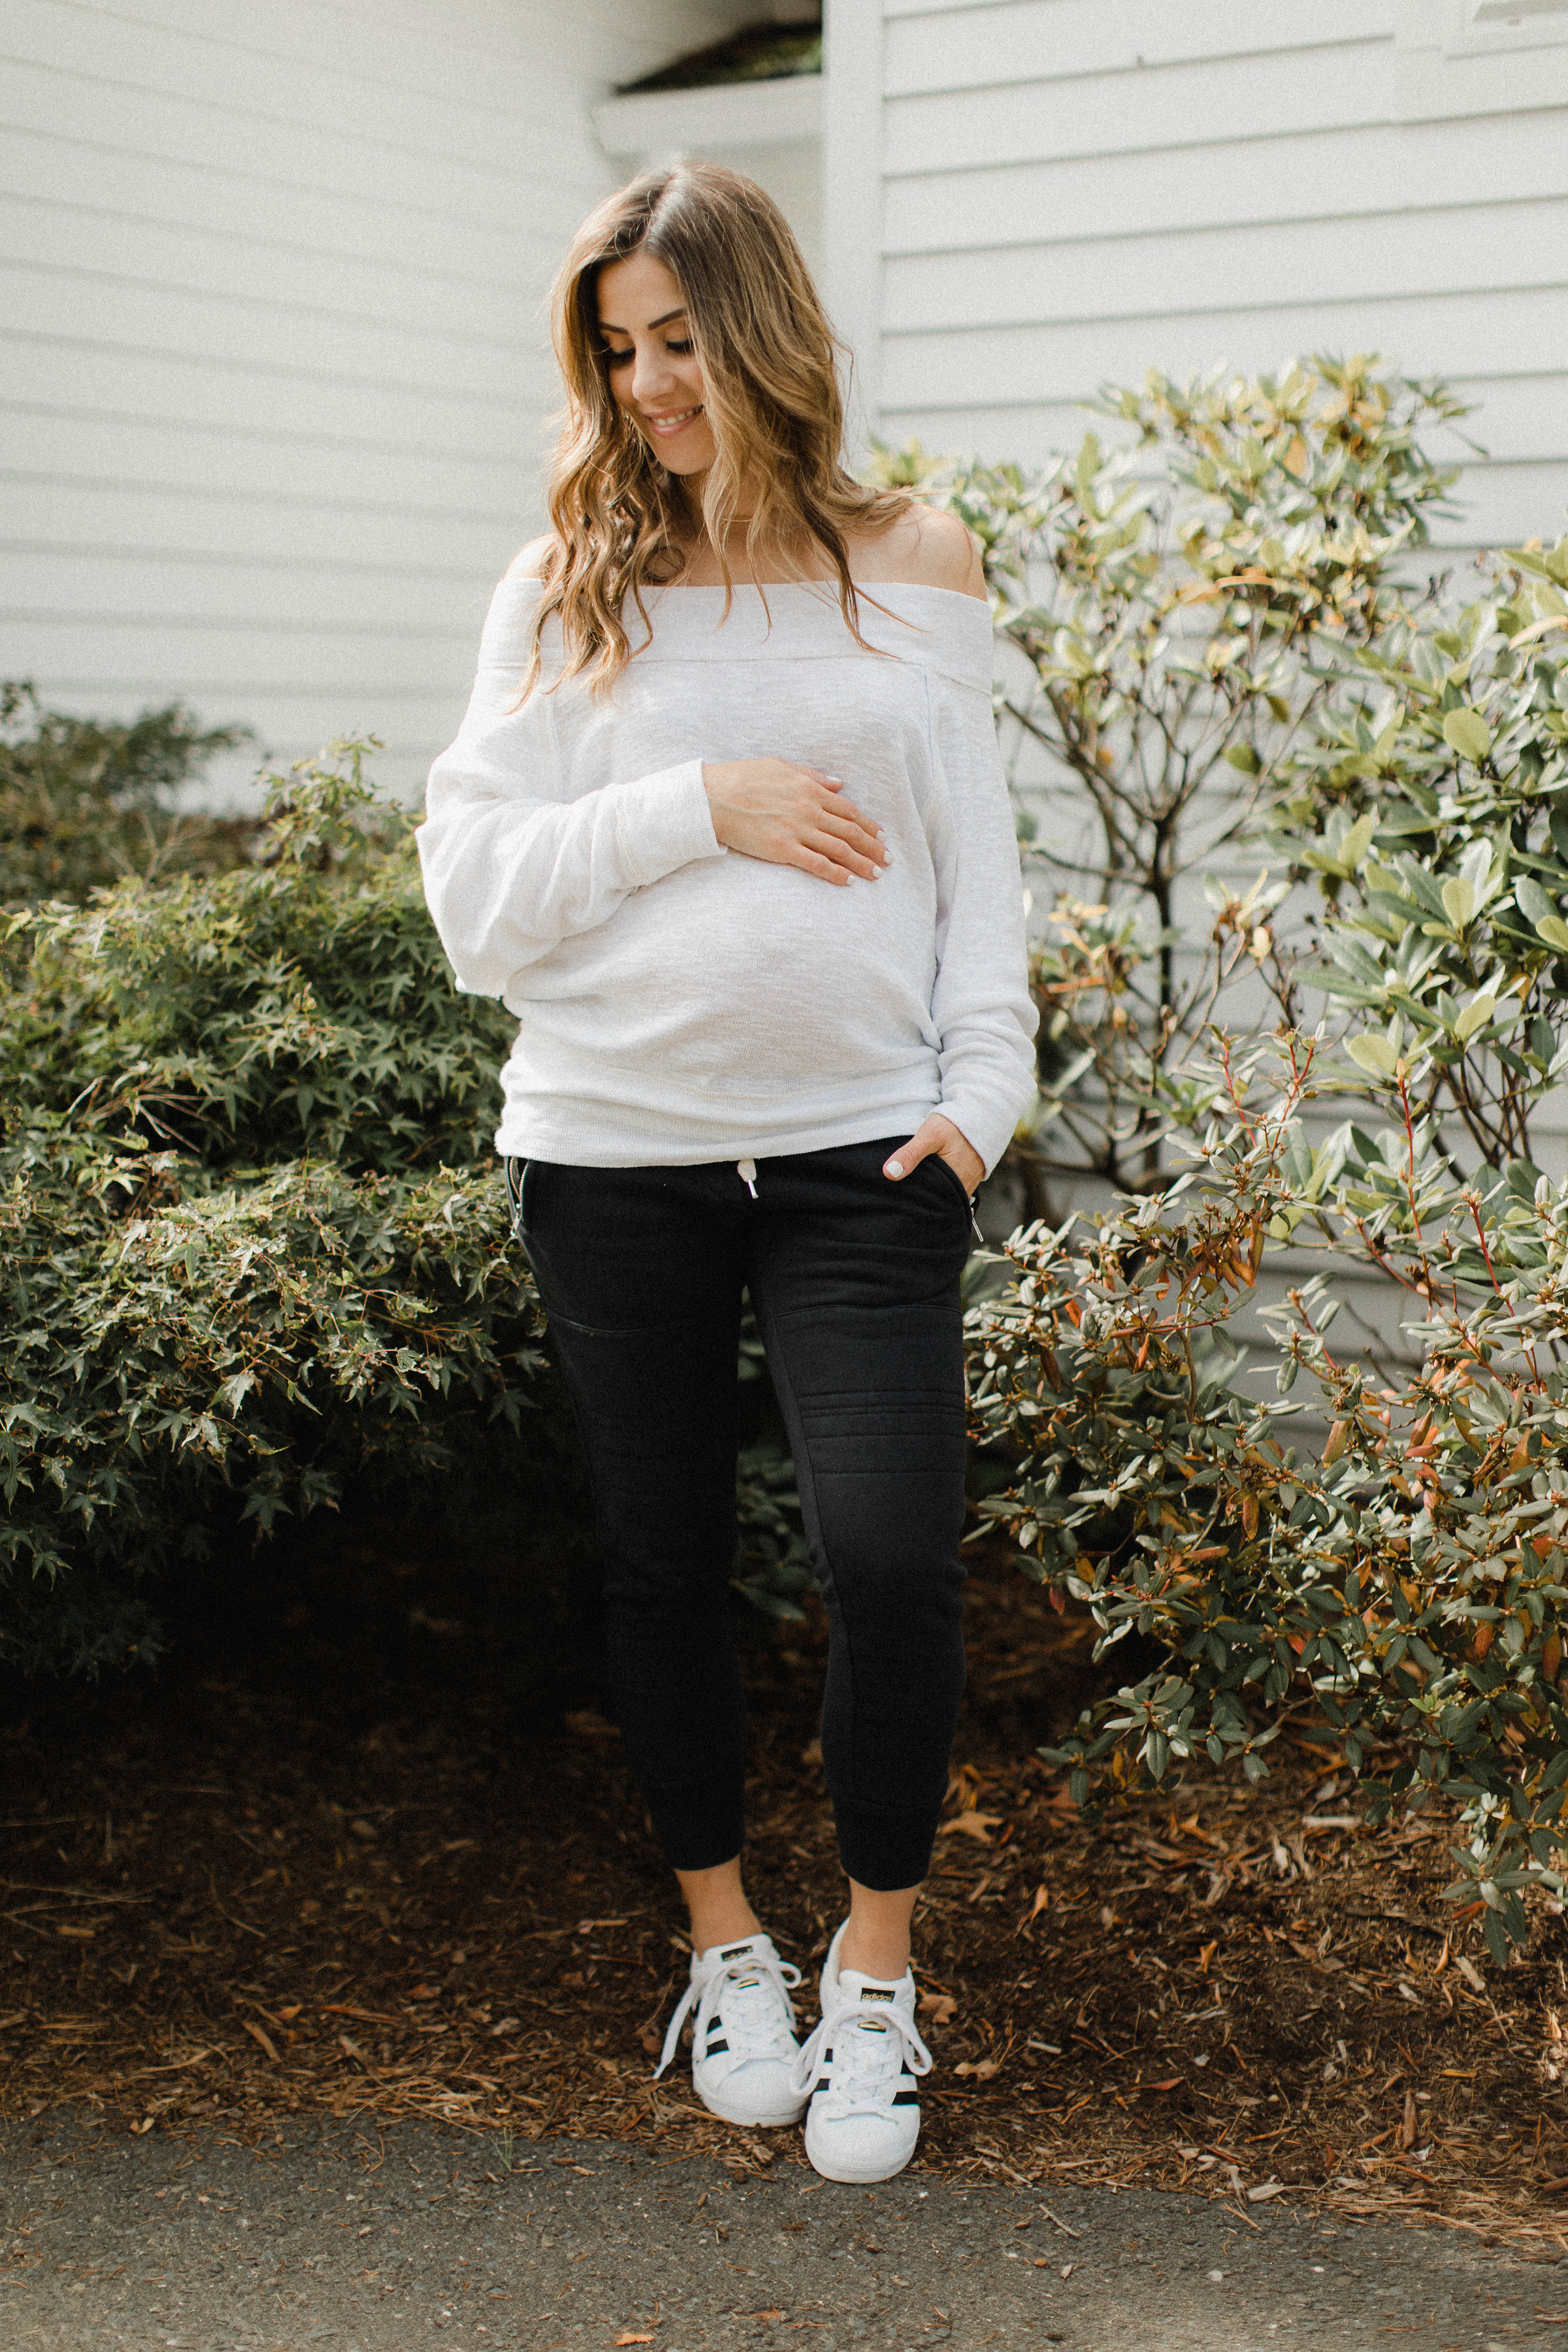 Life and style blogger Lauren McBride shares her tips on How to Style Jogger Pants for Fall including outfit ideas and styling tips.